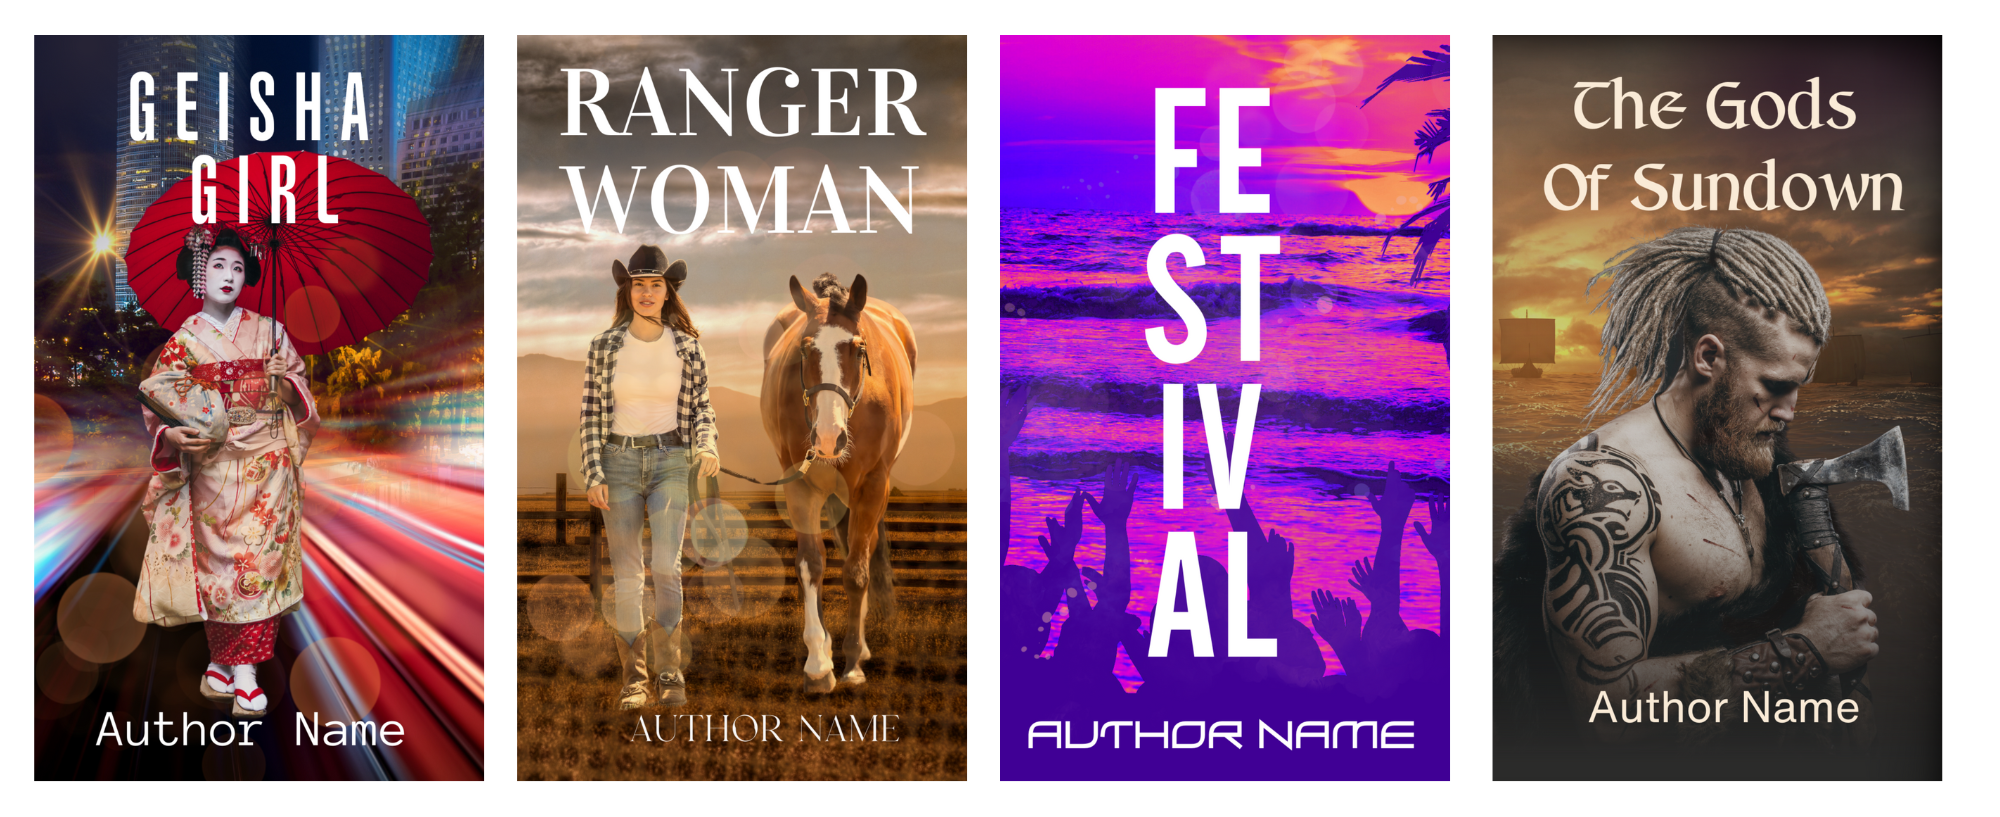 A set of four book covers. From left to right: 

1. "Geisha Girl" shows a woman in traditional Japanese attire. 
2. "Ranger Woman" depicts a woman in Western wear and a horse. 
3. "Festival" features bold letters over a vibrant sunset. 
4. "The Gods of Sundown" portrays a bearded warrior with an axe. 

All four list "Author Name. BookSelf Book Cover Design & Premade Book Covers